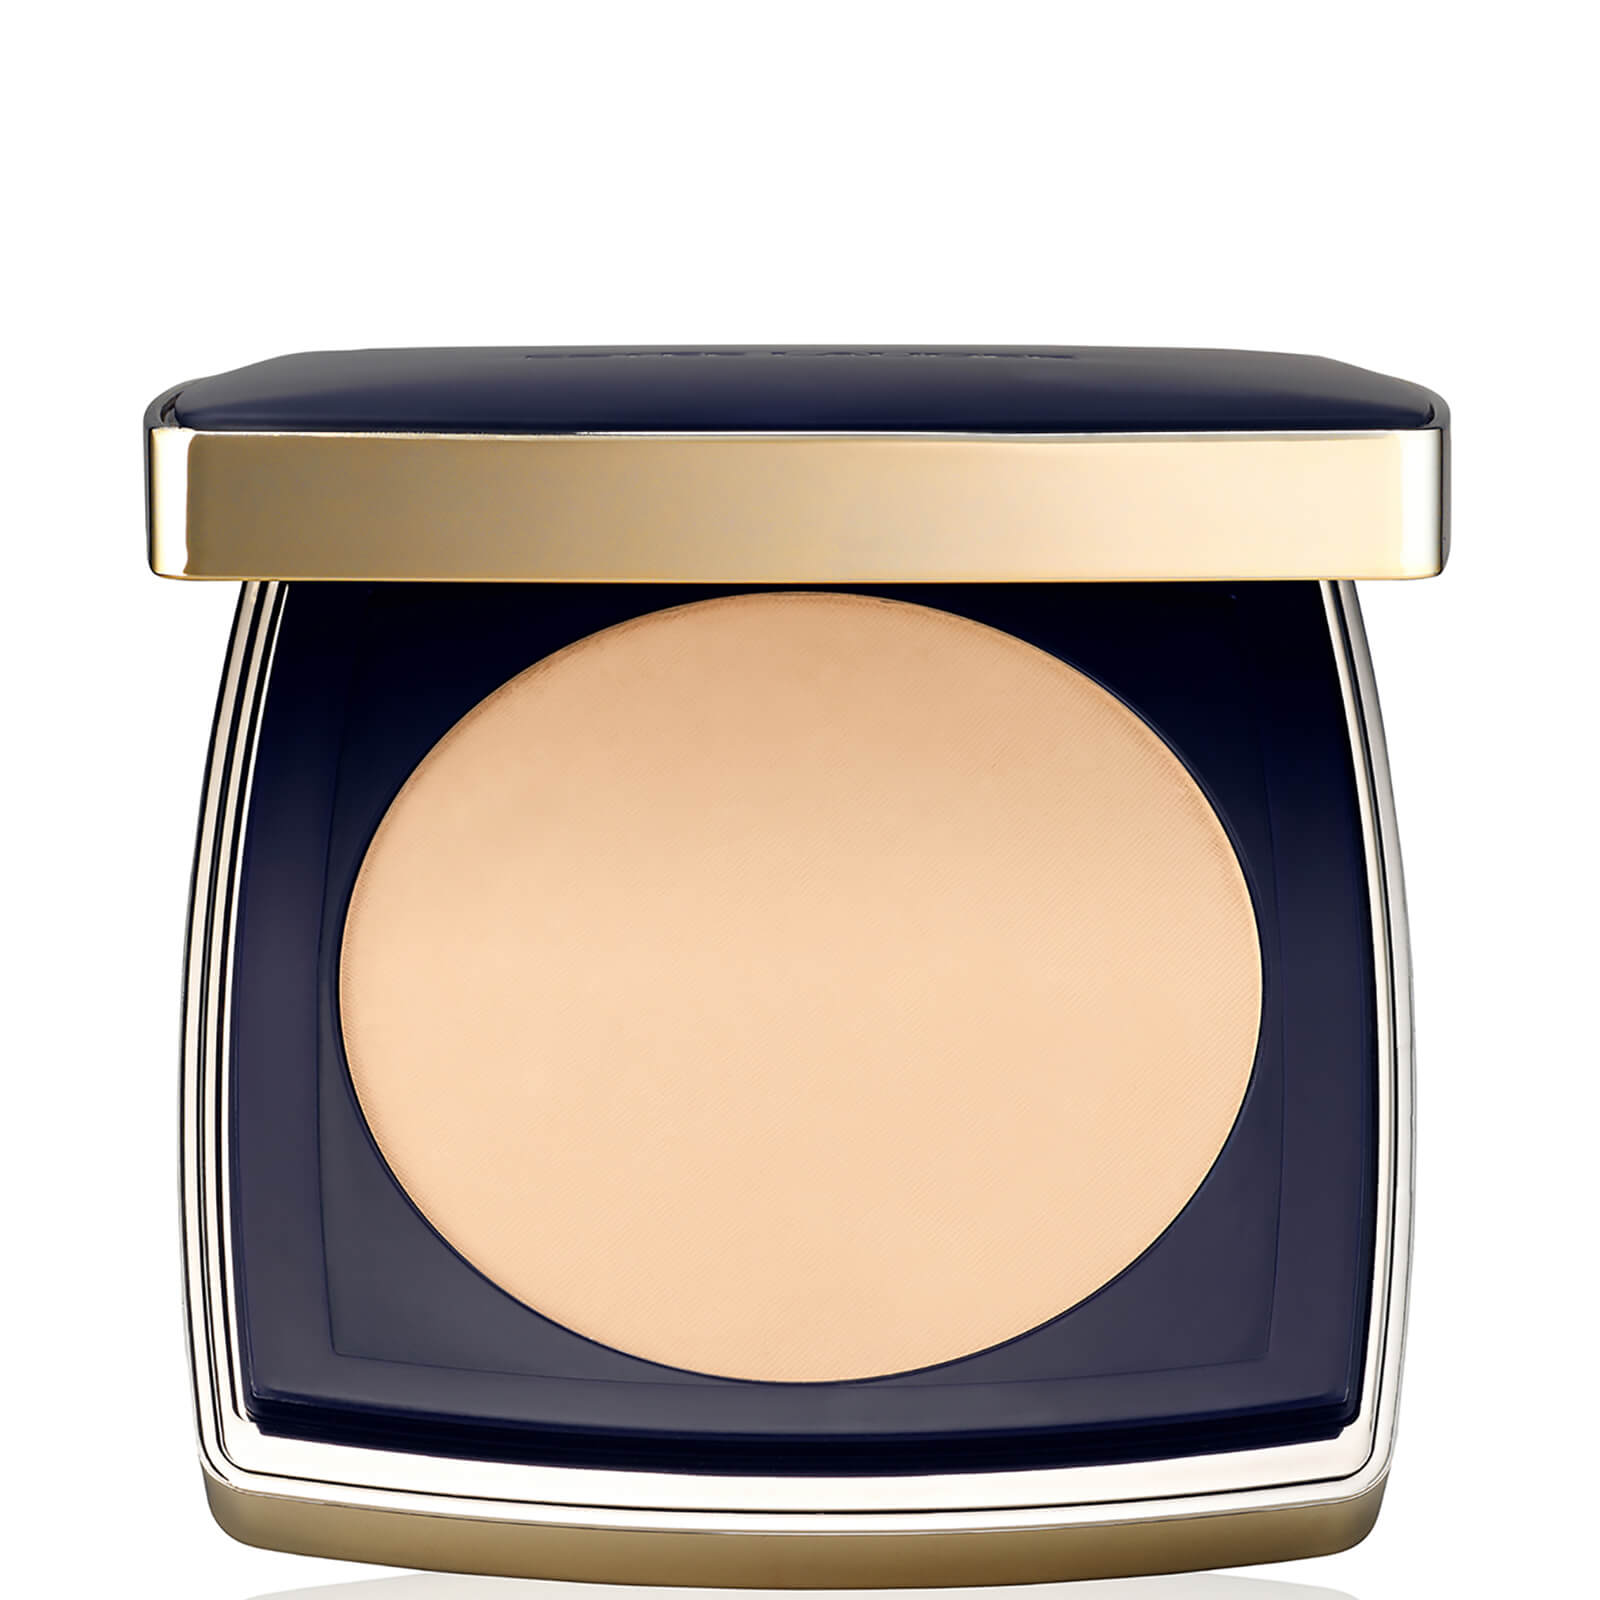 Estee Lauder Double Wear Stay-in-Place Matte Powder Foundation SPF10 12g (Various Shades) - 2W1 Dawn